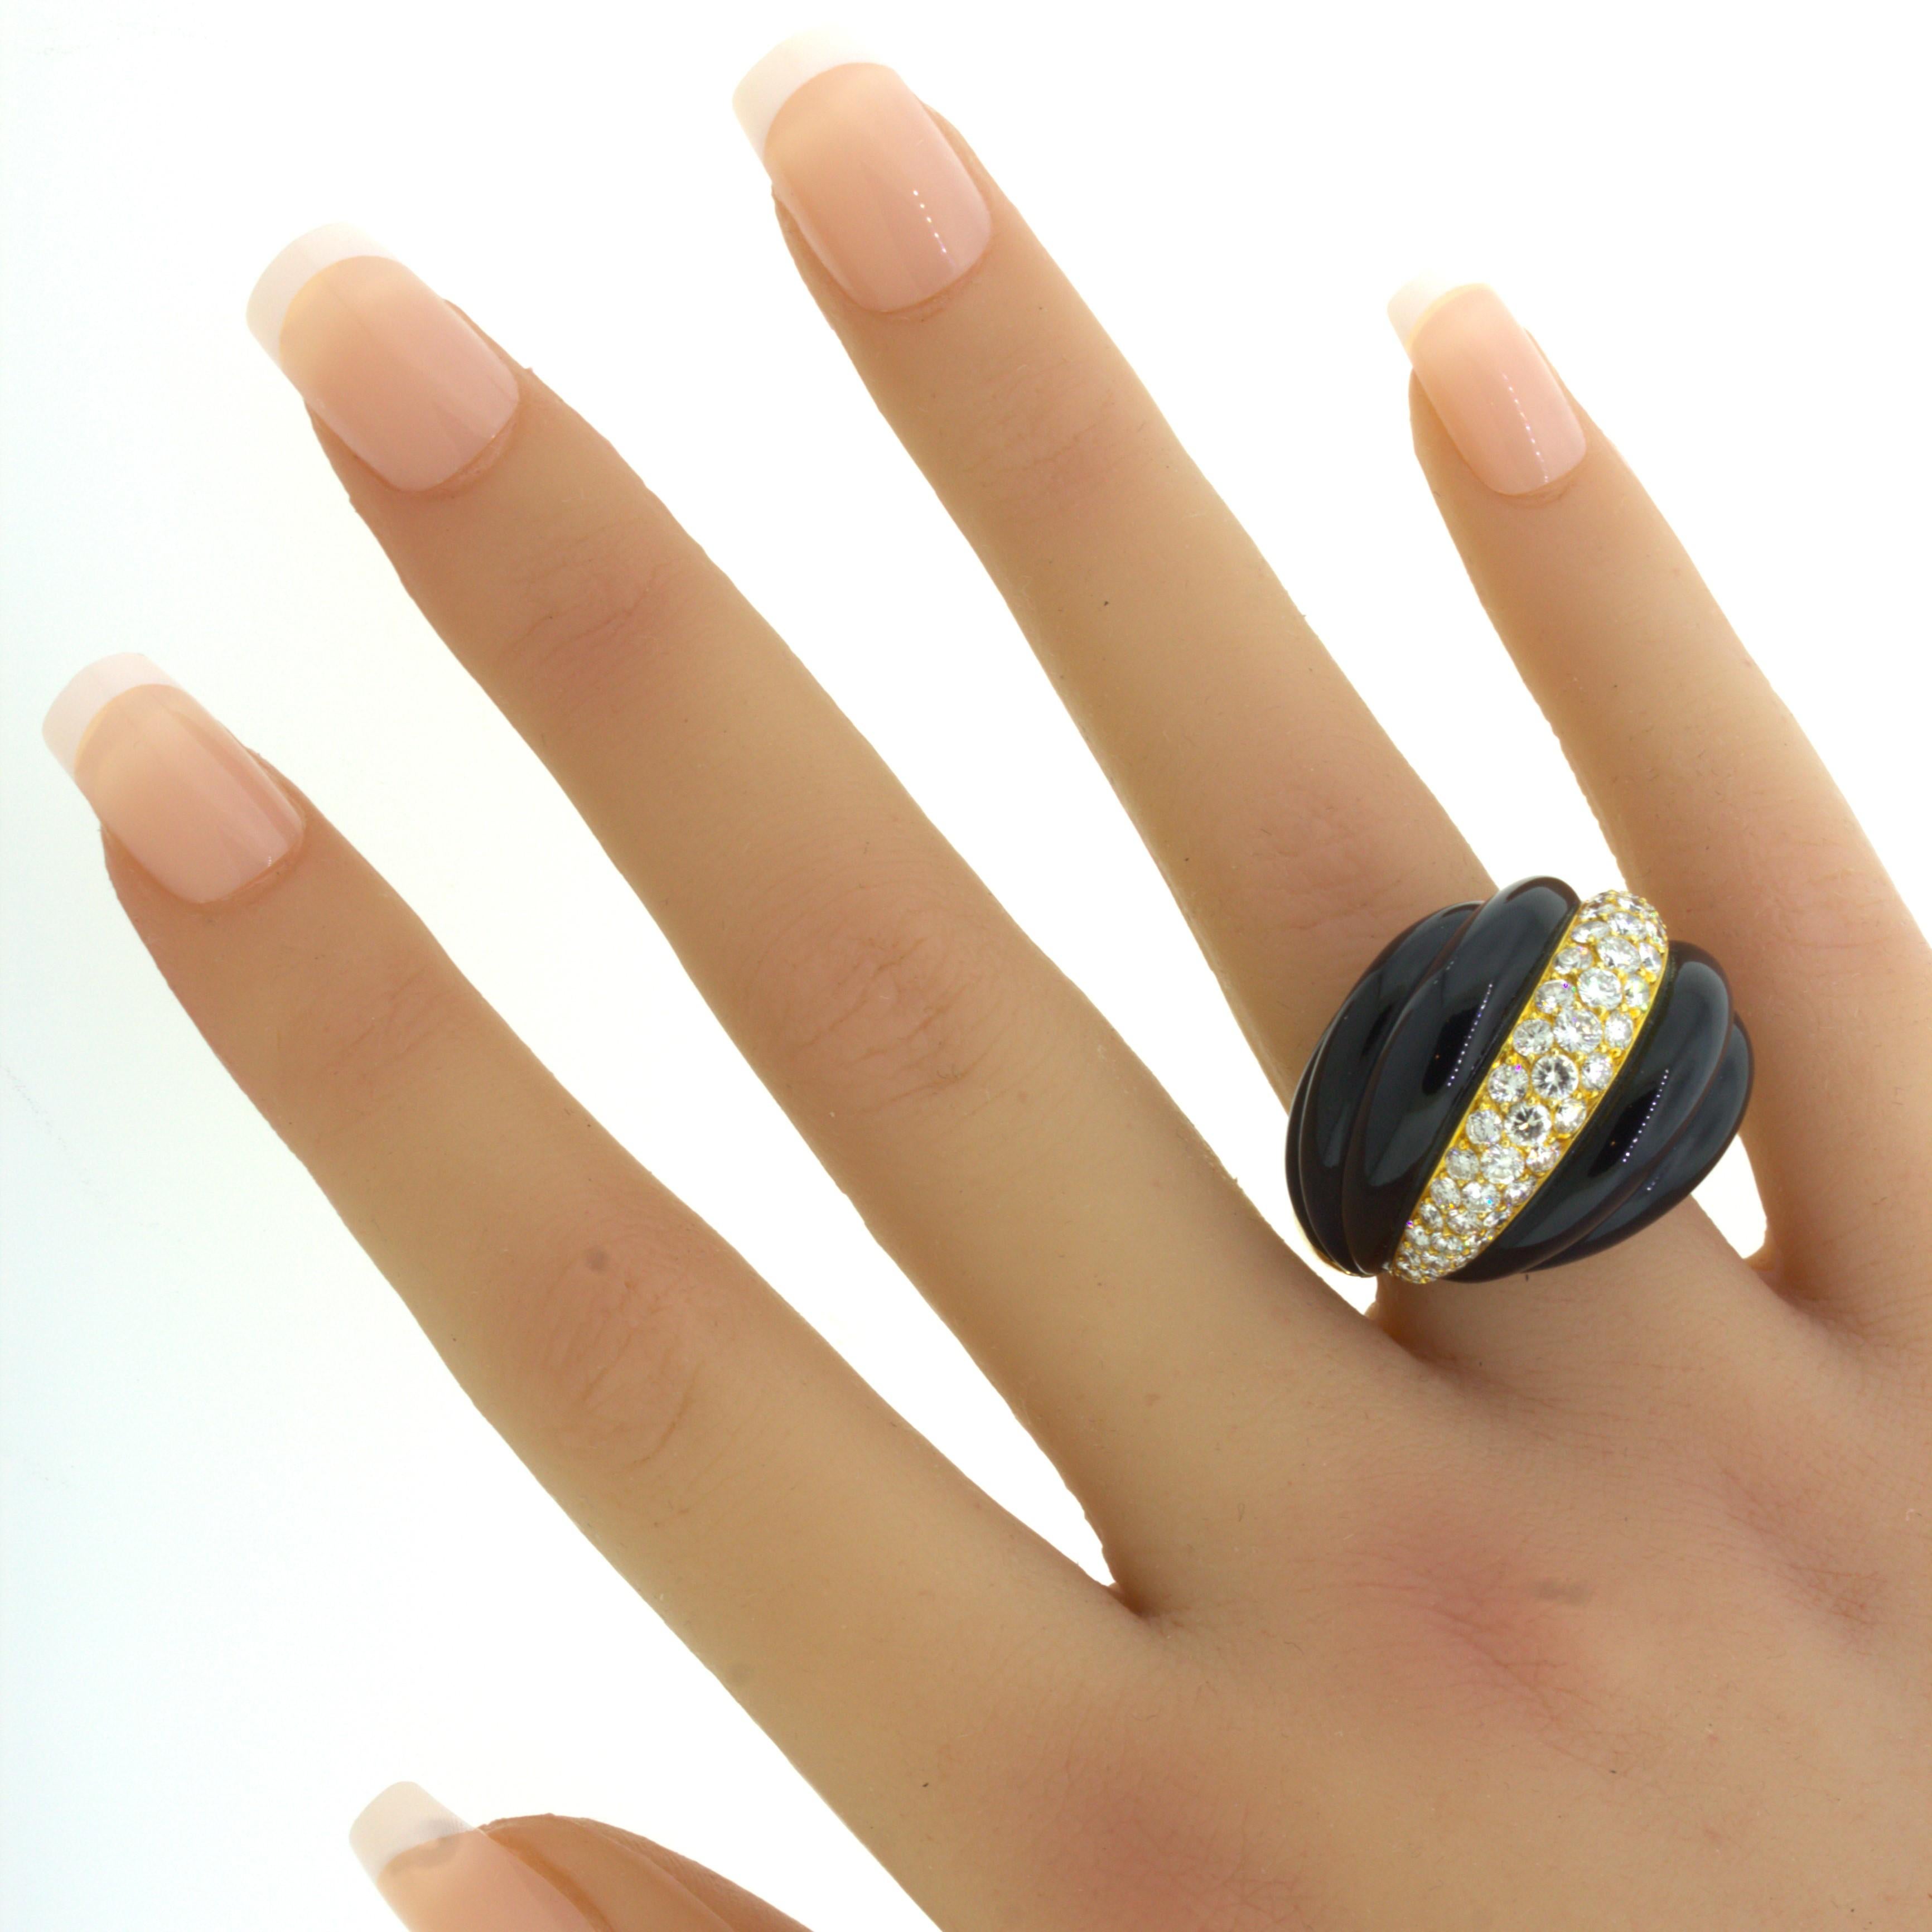 Fred Paris Diamond Onyx 18K Yellow Gold Cocktail Ring, French For Sale 4